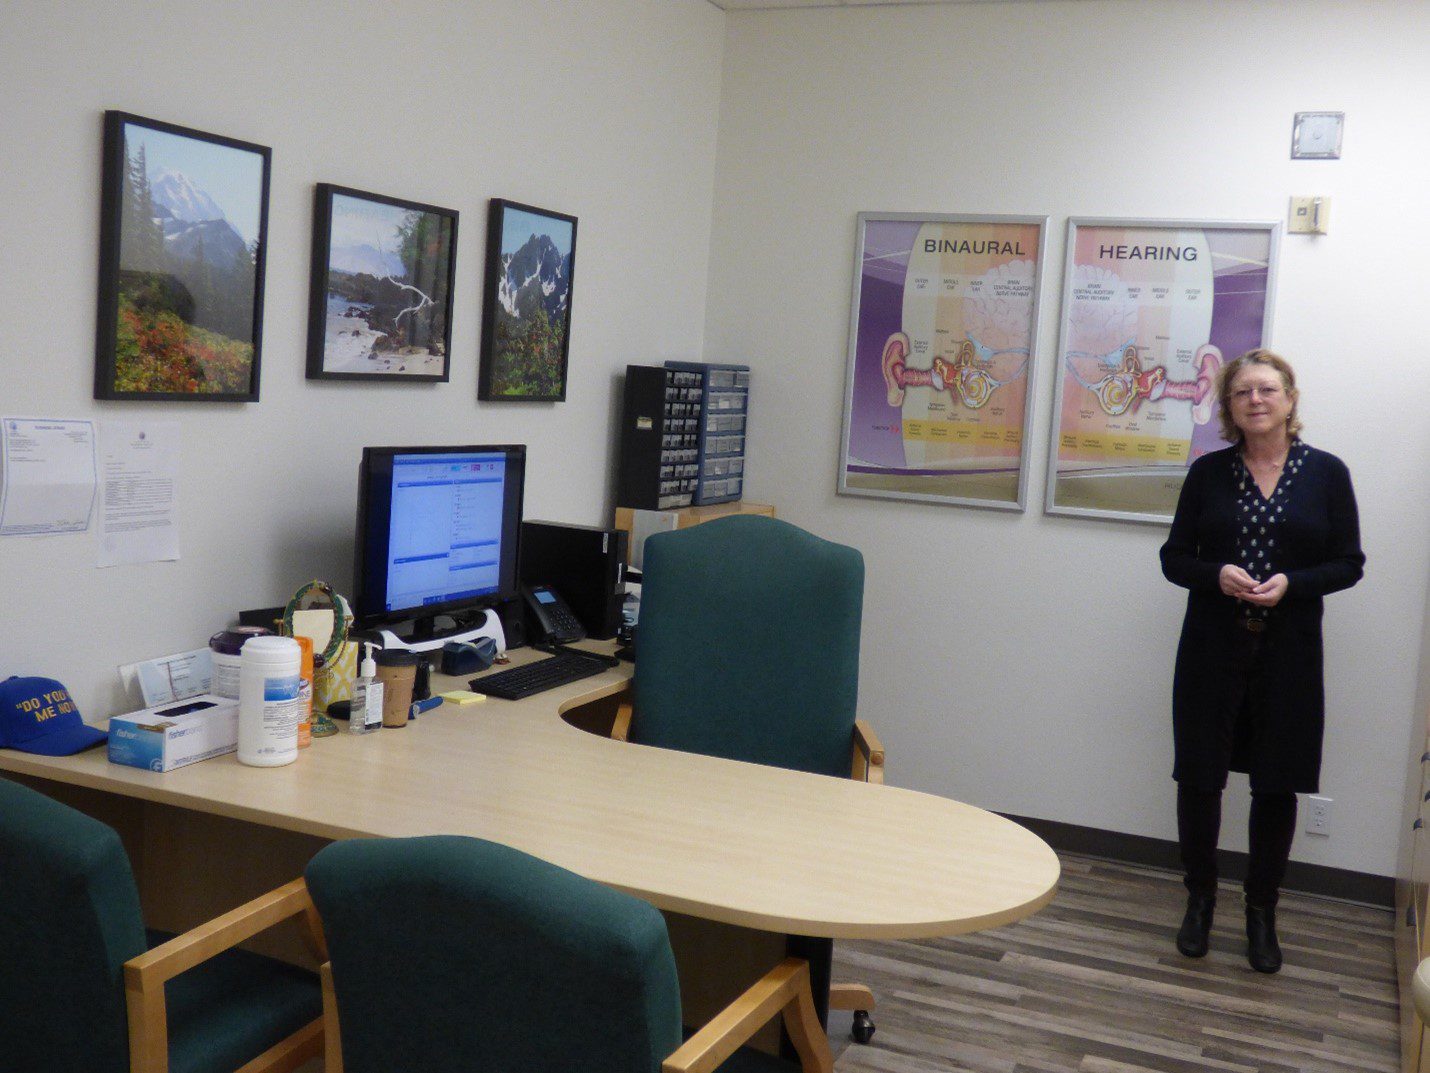 Julie VanAusdal, Cognitive screening specialist of South Sound Audiology